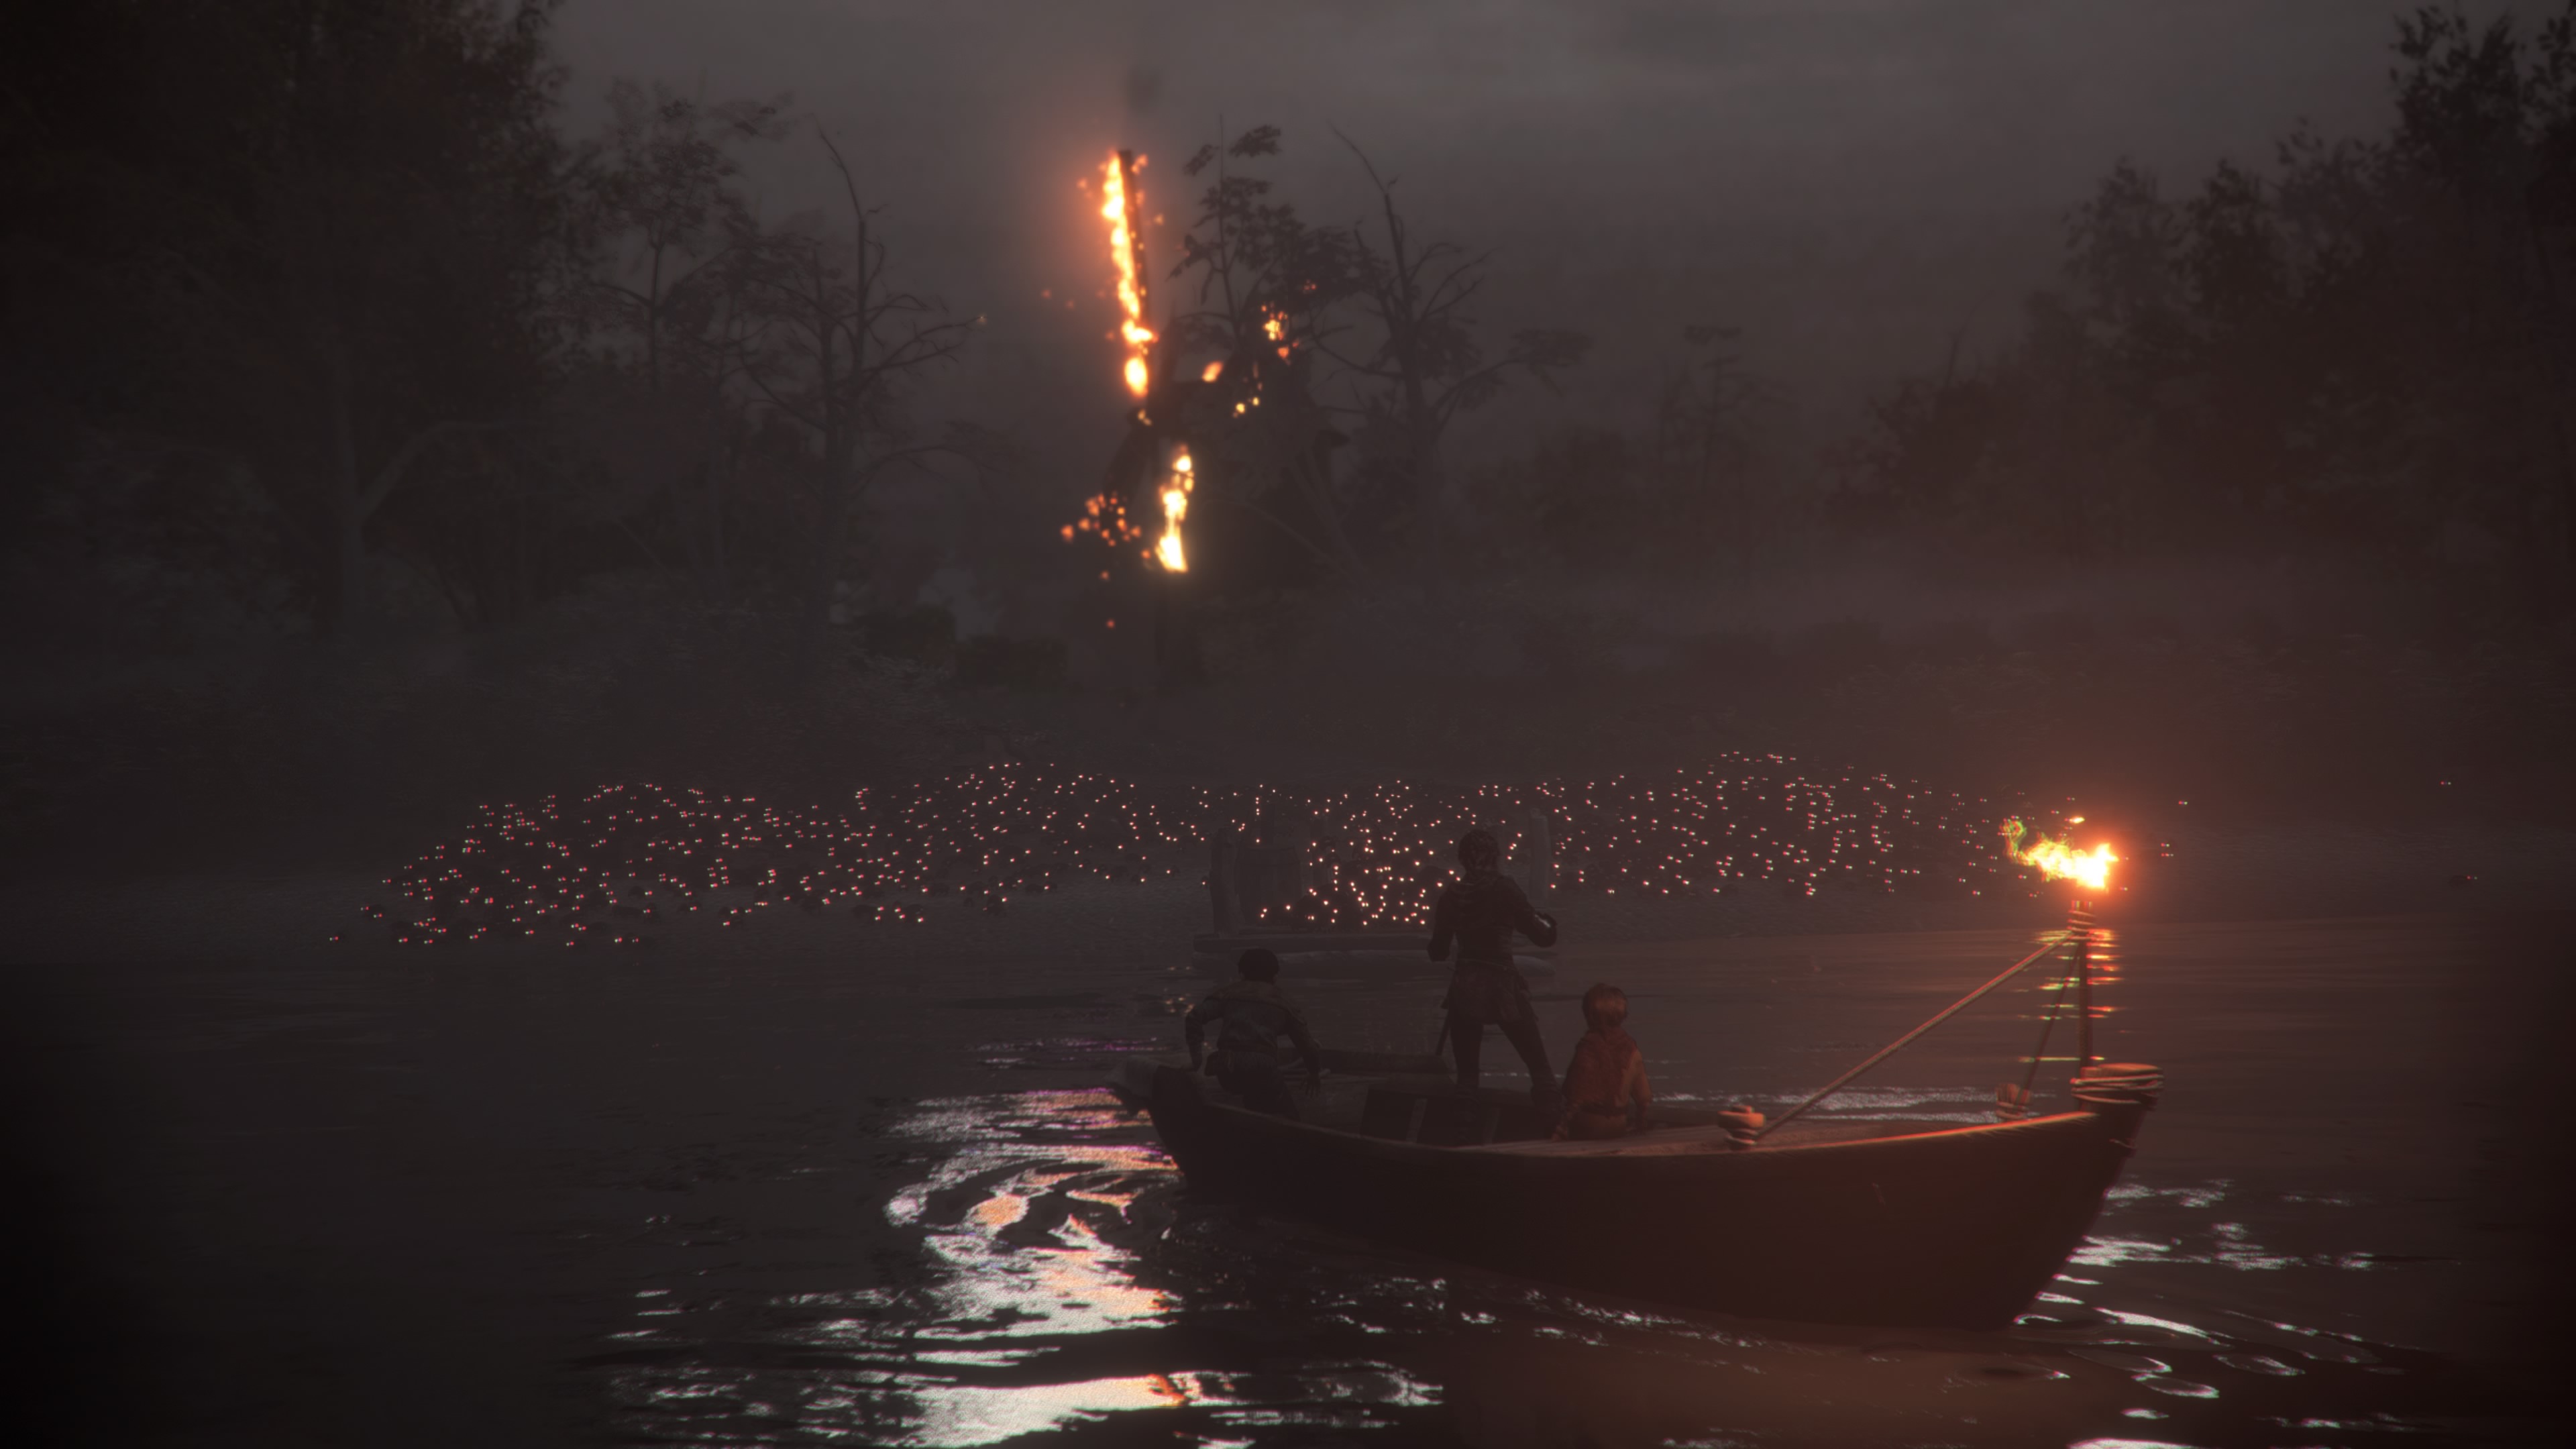 General 3840x2160 A Plague Tale Innocence video games Asobo Studio water boat video game girls video game boys fire video game characters night